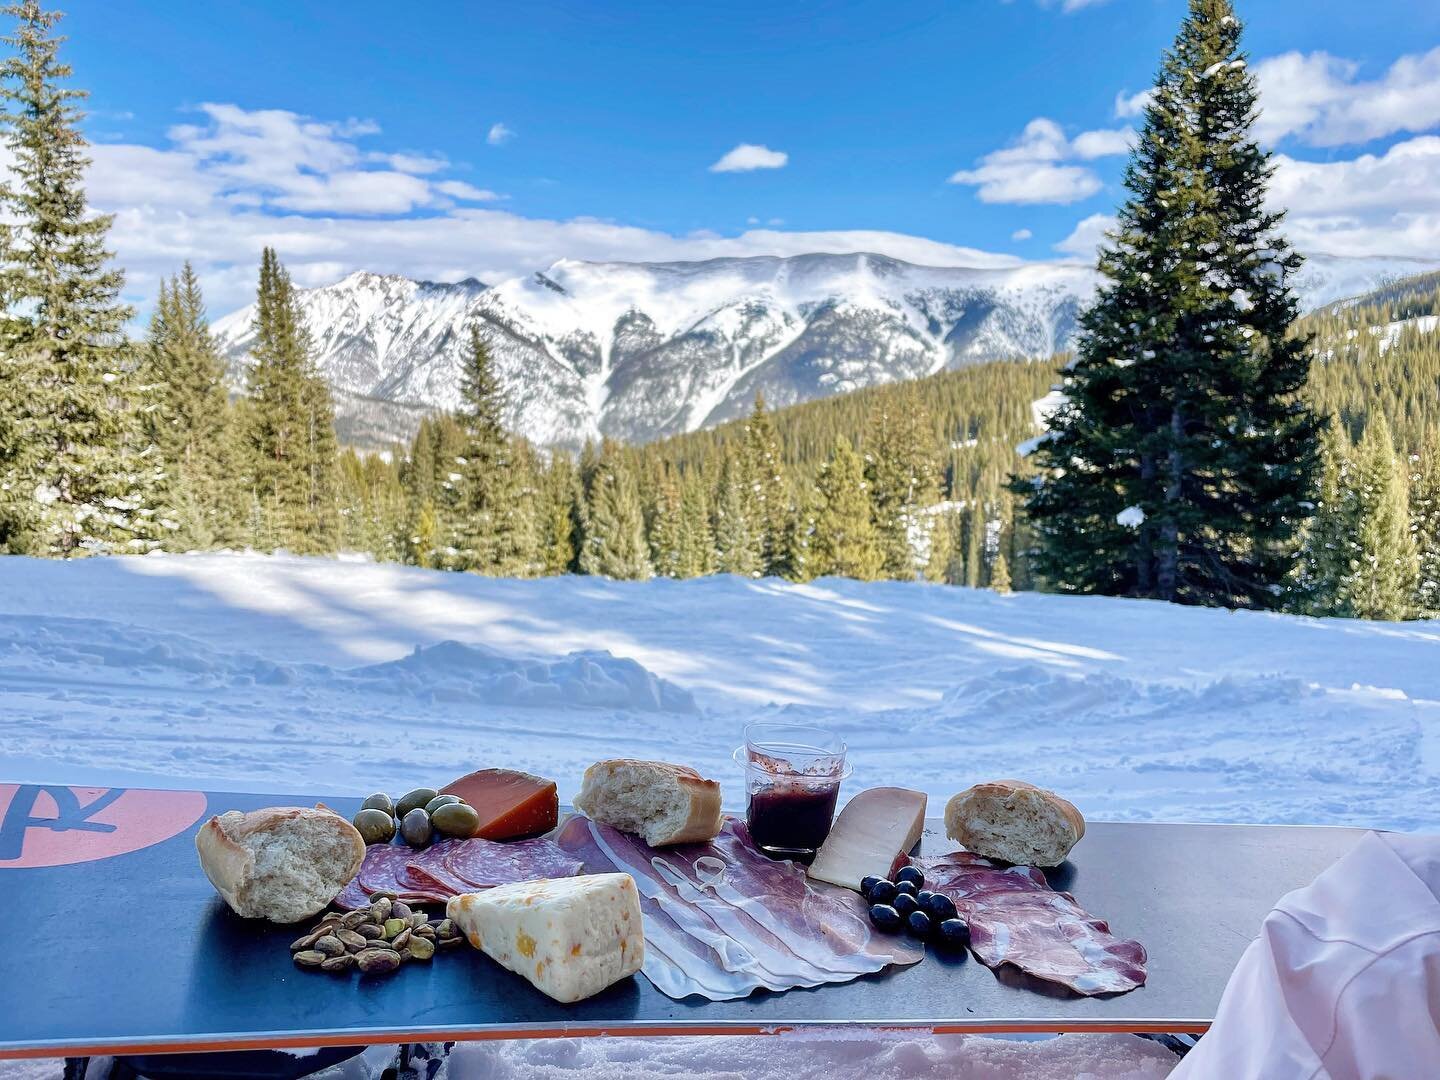 A Ewephoric day on the slopes. 
&bull;
Apricot Stilton, Mimolette, Ewephoria goat cheese, Prosciutto, Coppa, Salame, Fig Jam, Italian Bread, Pistachios, Olives, Brookside A&ccedil;a&iacute; &amp; Blueberry, and Kaleidoscope Red Blend on a Rossignol s